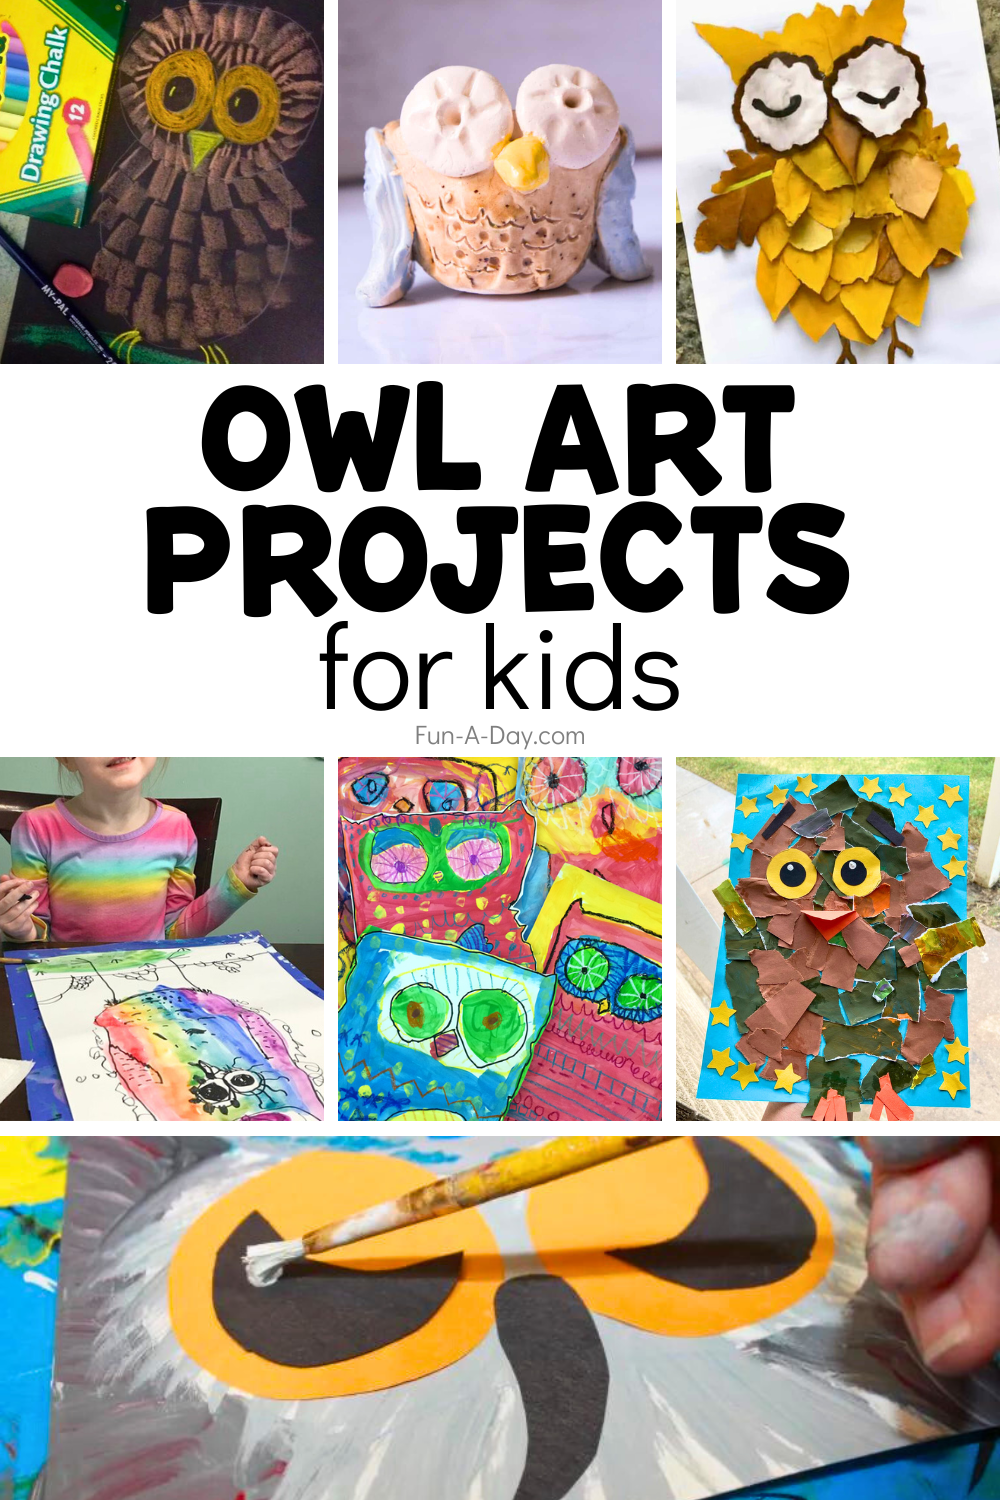 Seven owl art projects with text that reads owl art projects for kids.